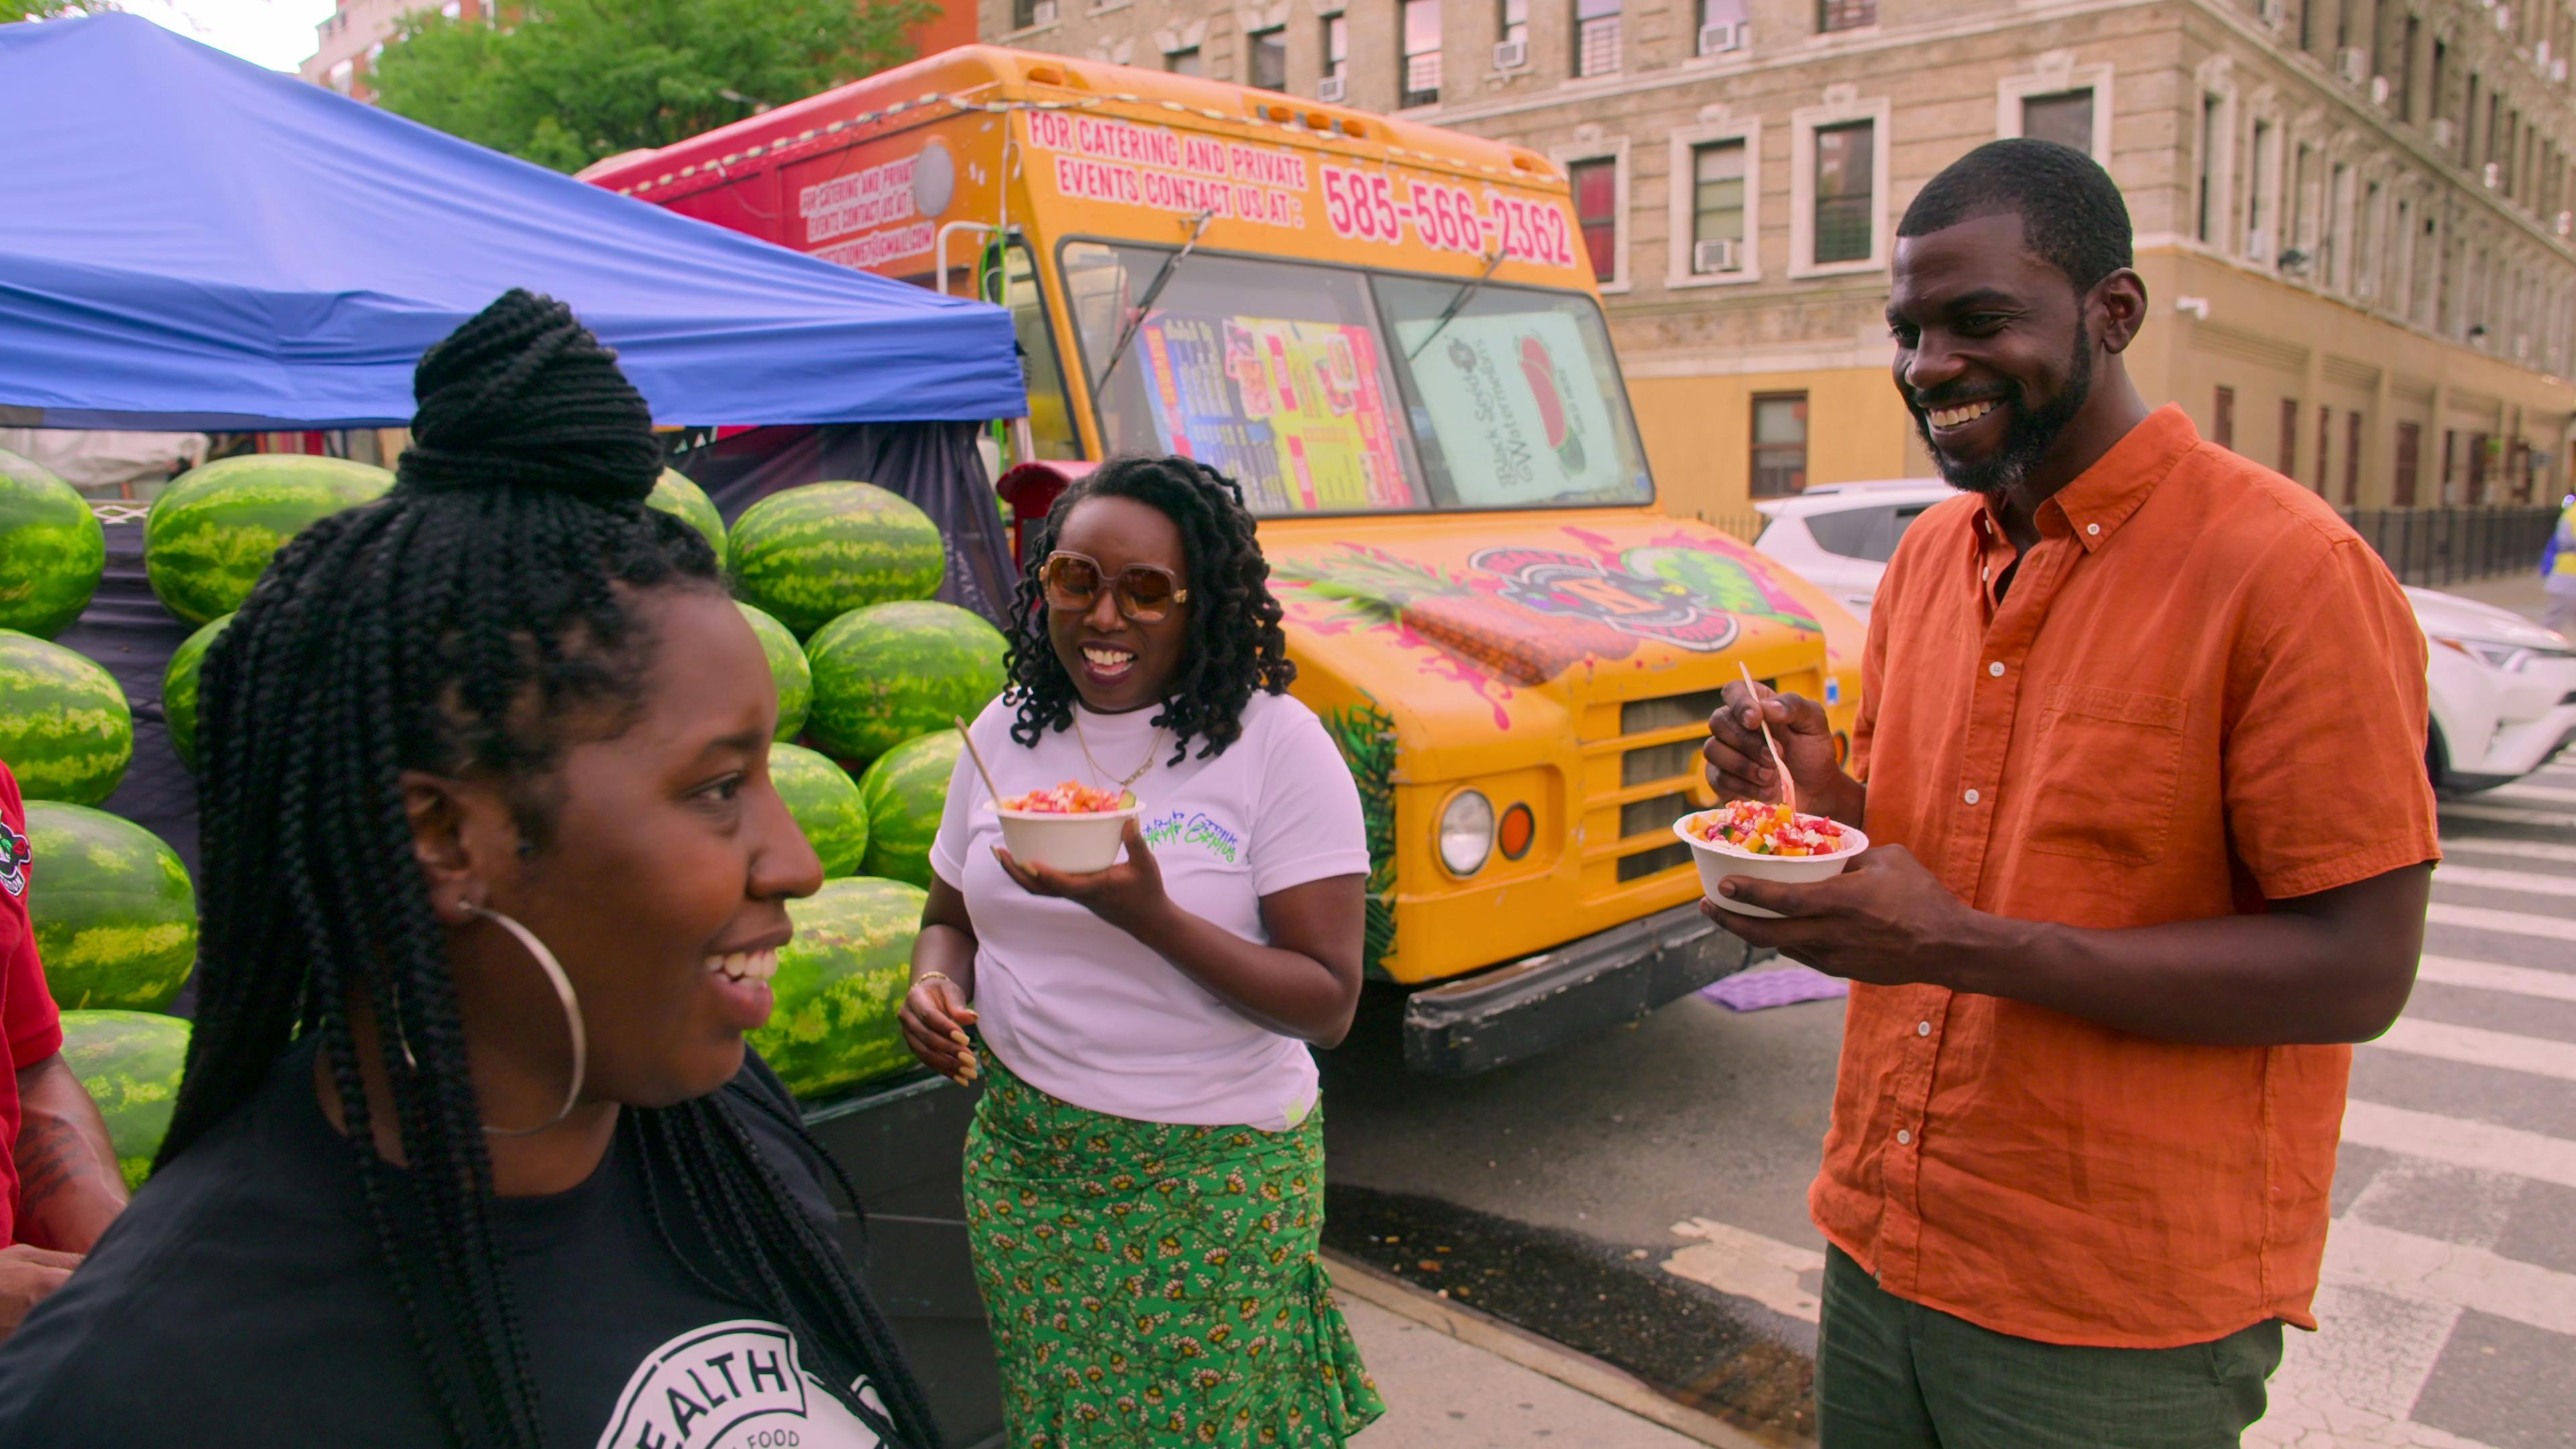 Stephen Satterfield eats something from a food truck with two other people. Behind them is a watermelon stand and an orange food truck.